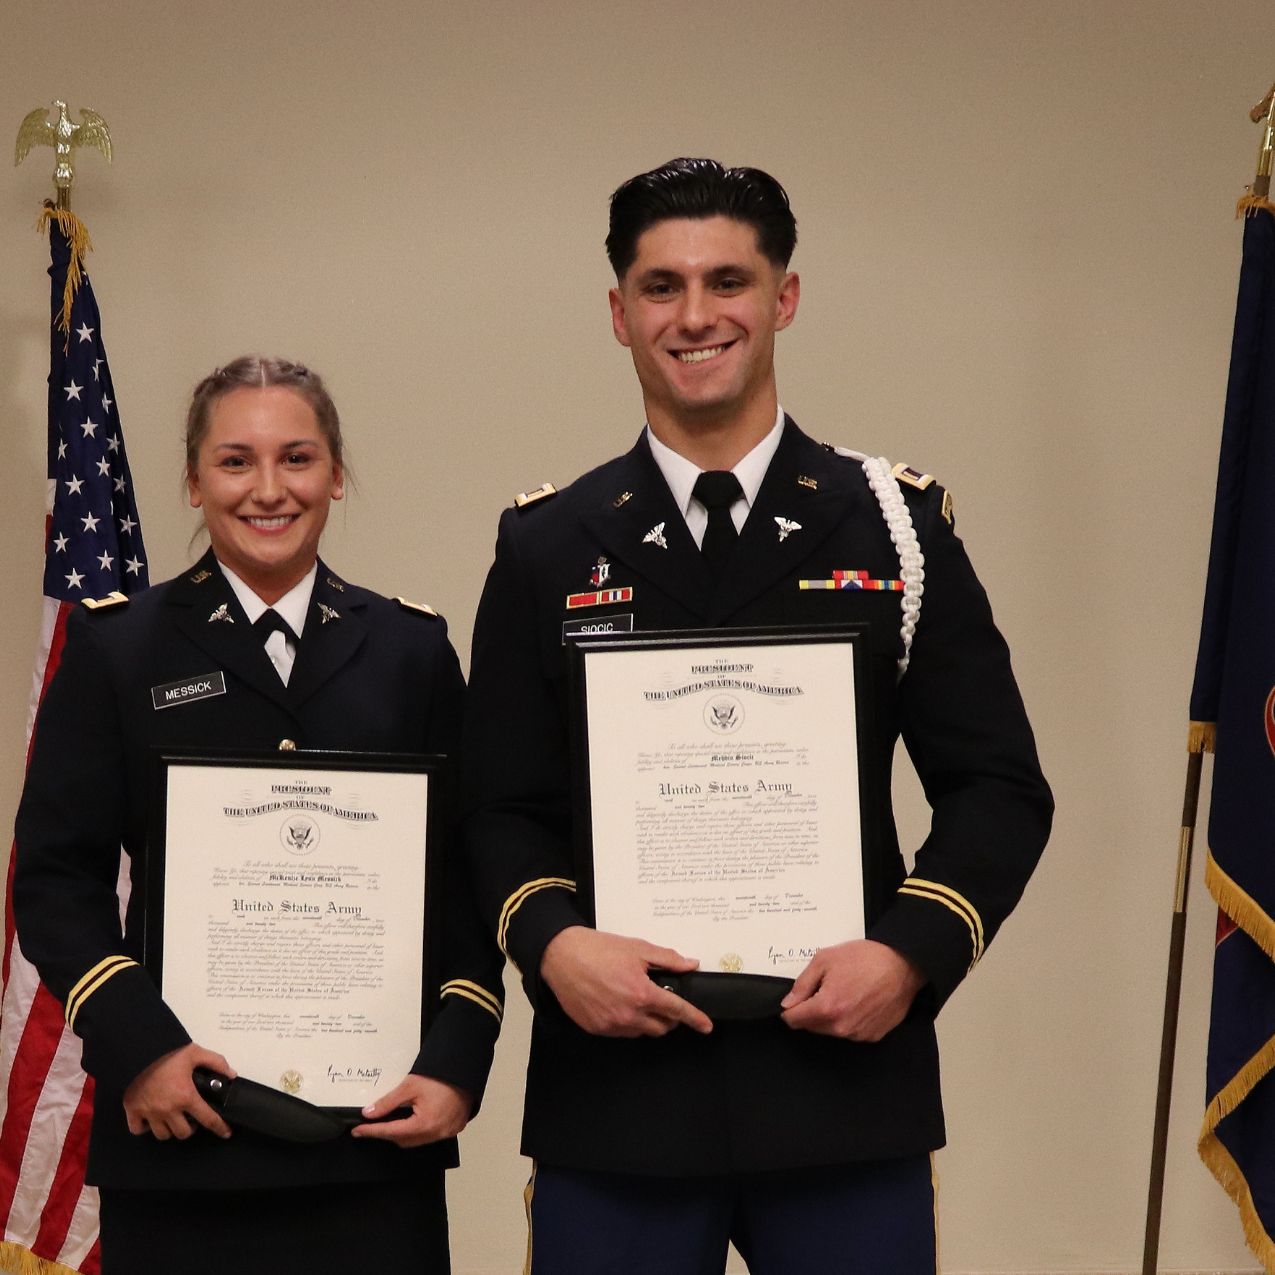 2 ROTC students dressed in their formal military uniform hold certificates and smile, in the background are the US and Idaho flags